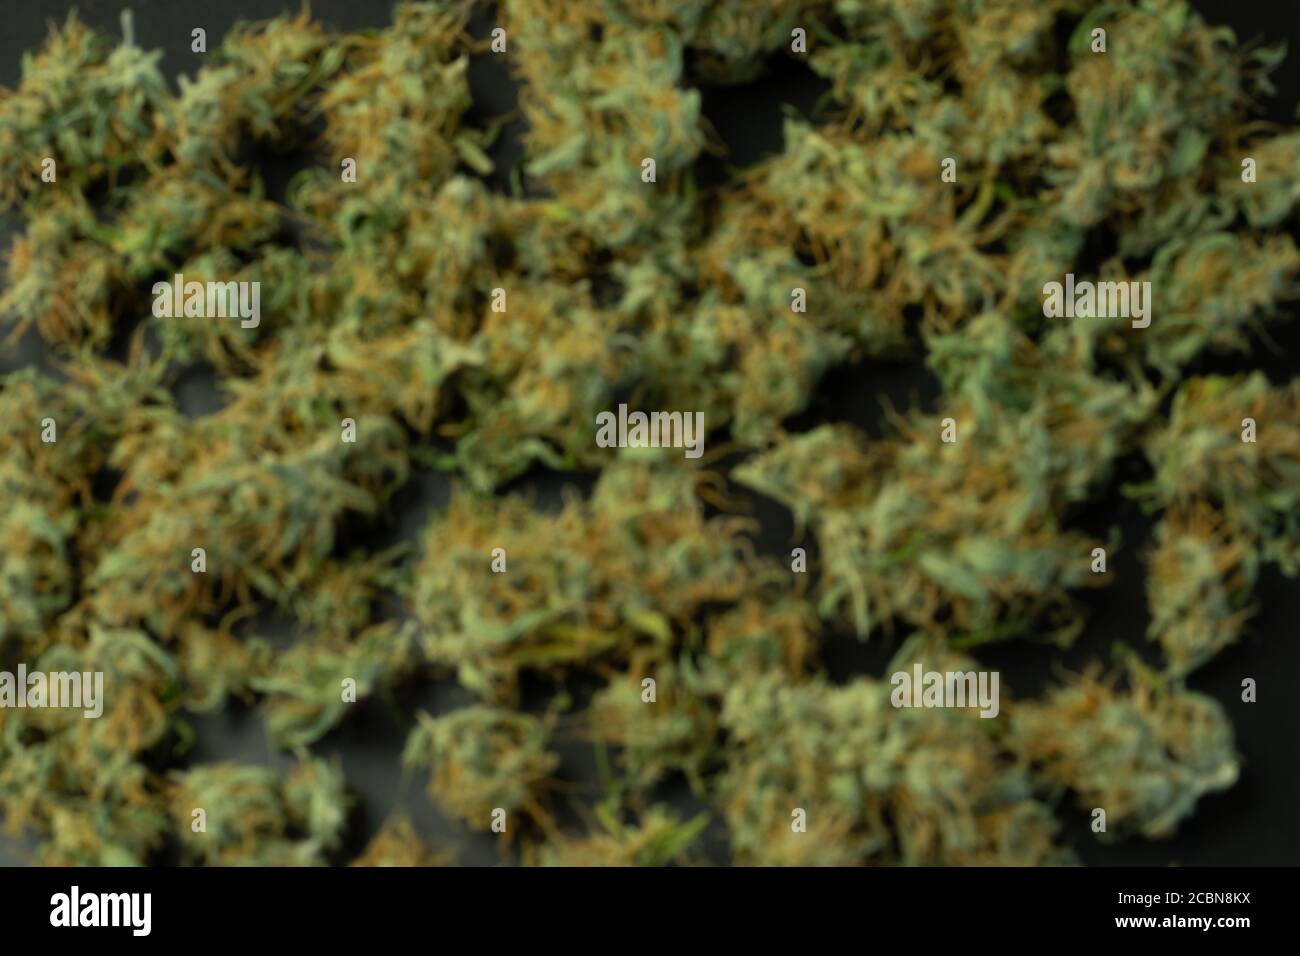 Blurry cannabis background top view Stock Photo